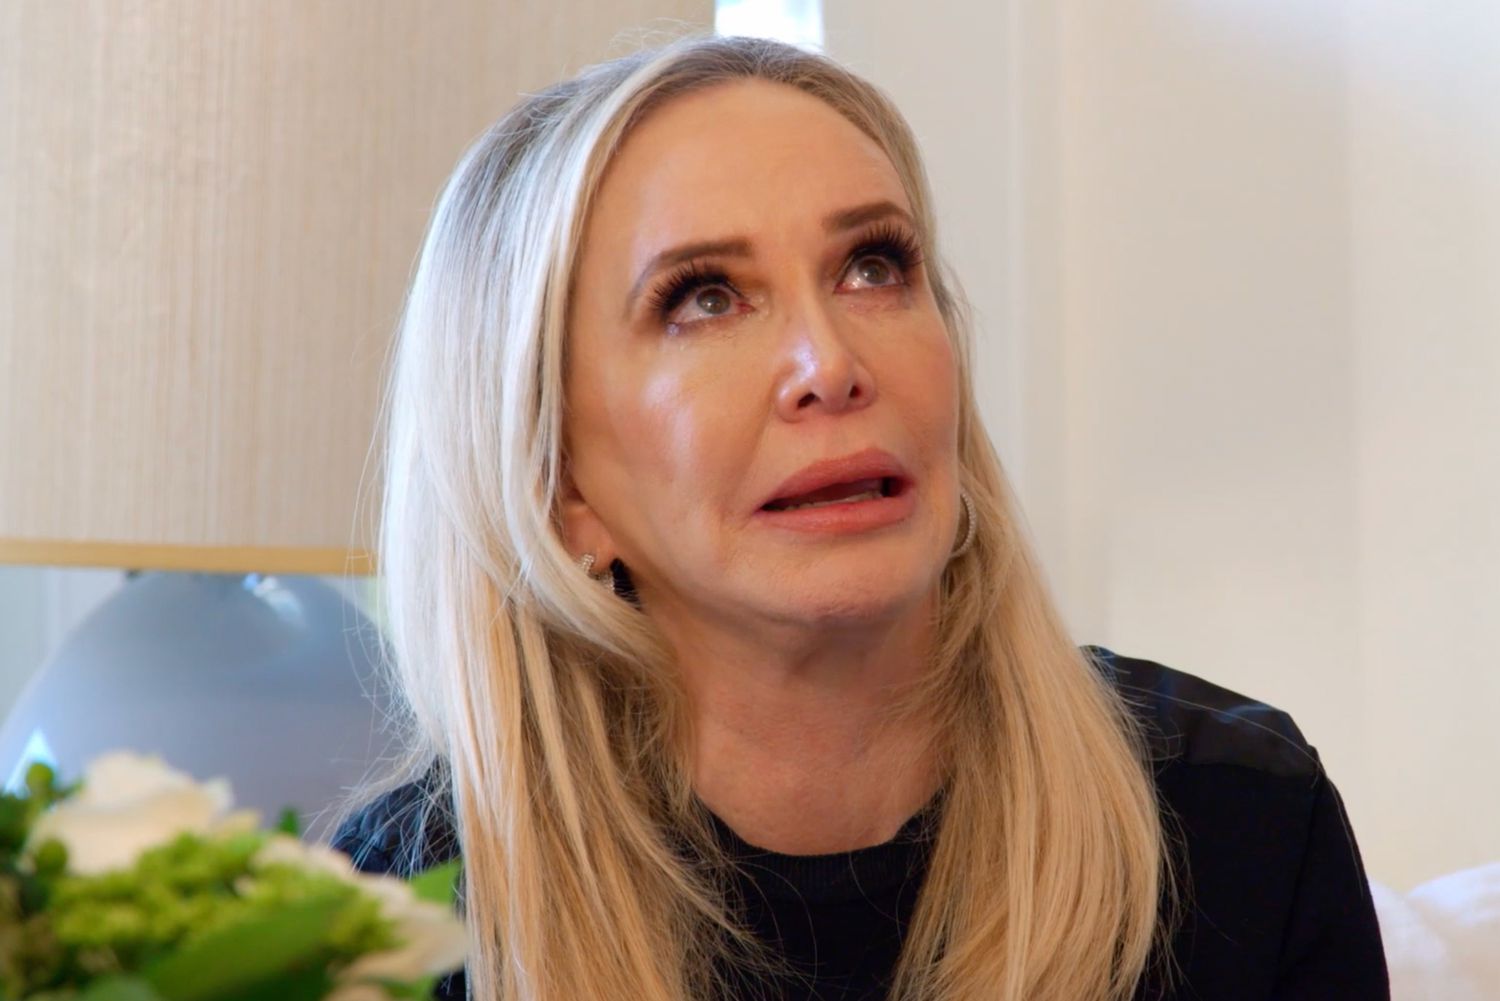 RHOC’s Shannon Beador Tears Up Asking for Forgiveness After DUI [Video]